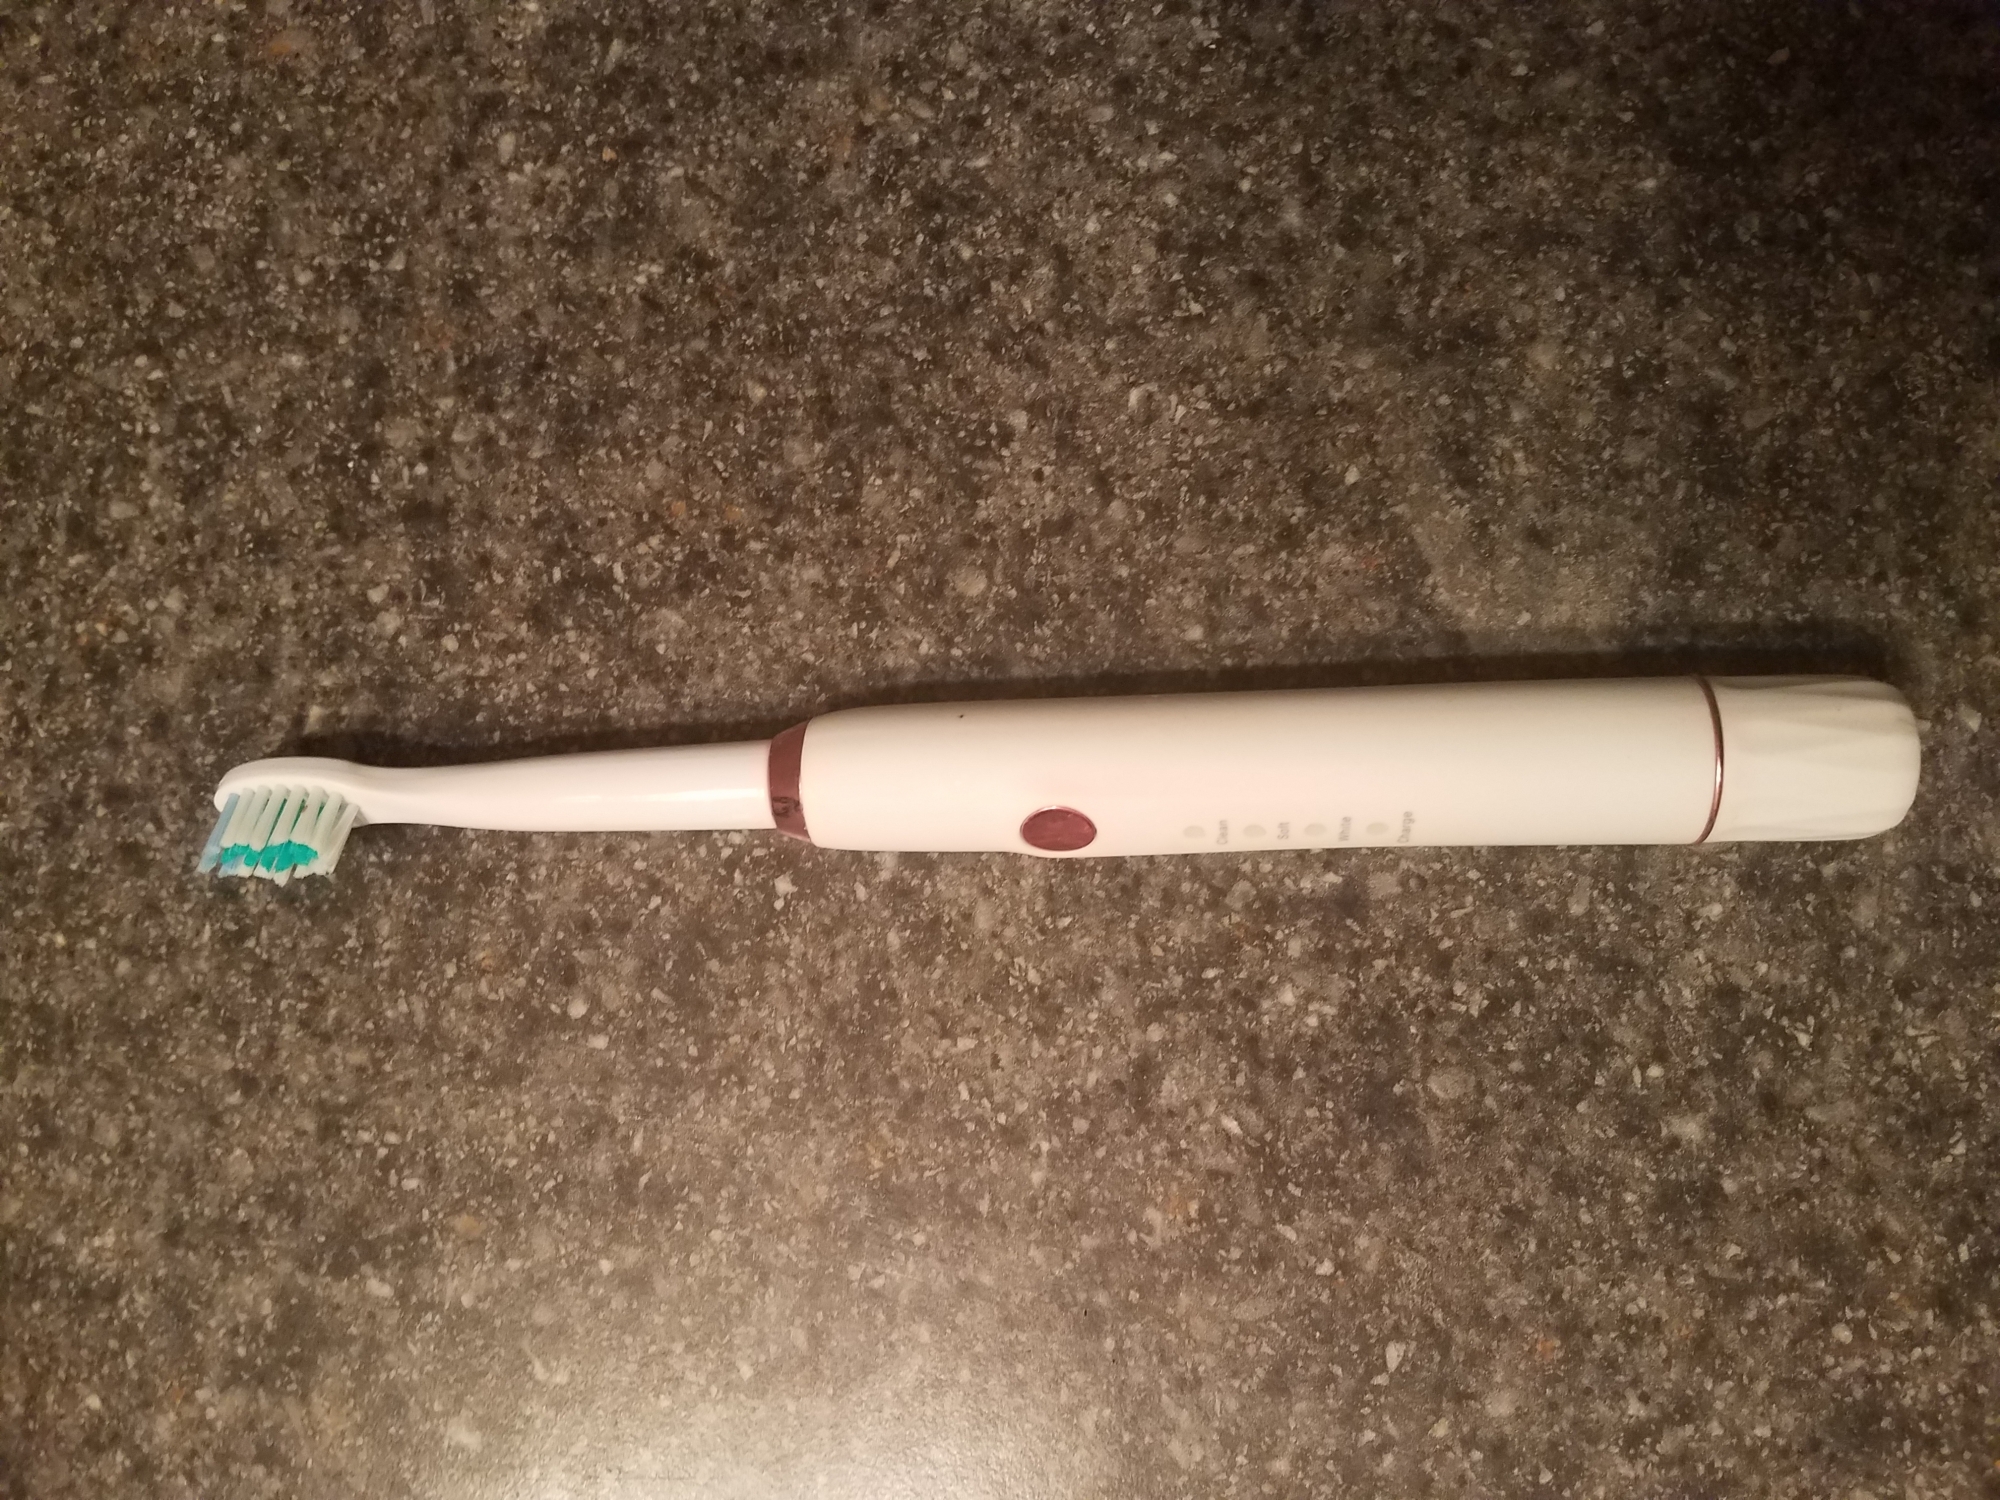 Replaced a much higher priced toothbrush